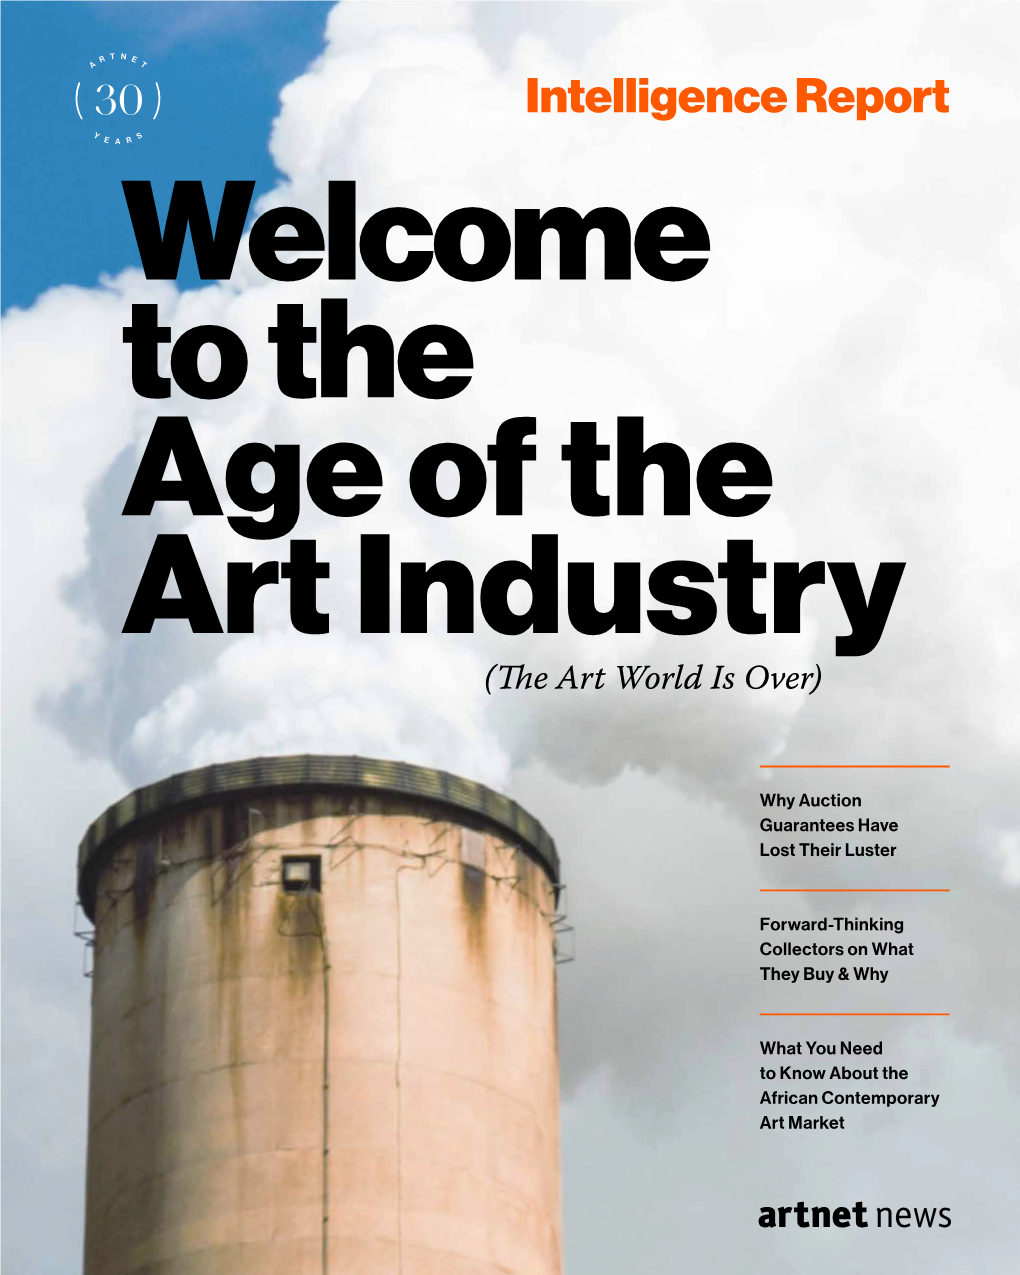 Intelligence Report Welcome to the Age of the Art Industry (The Art World Is Over)